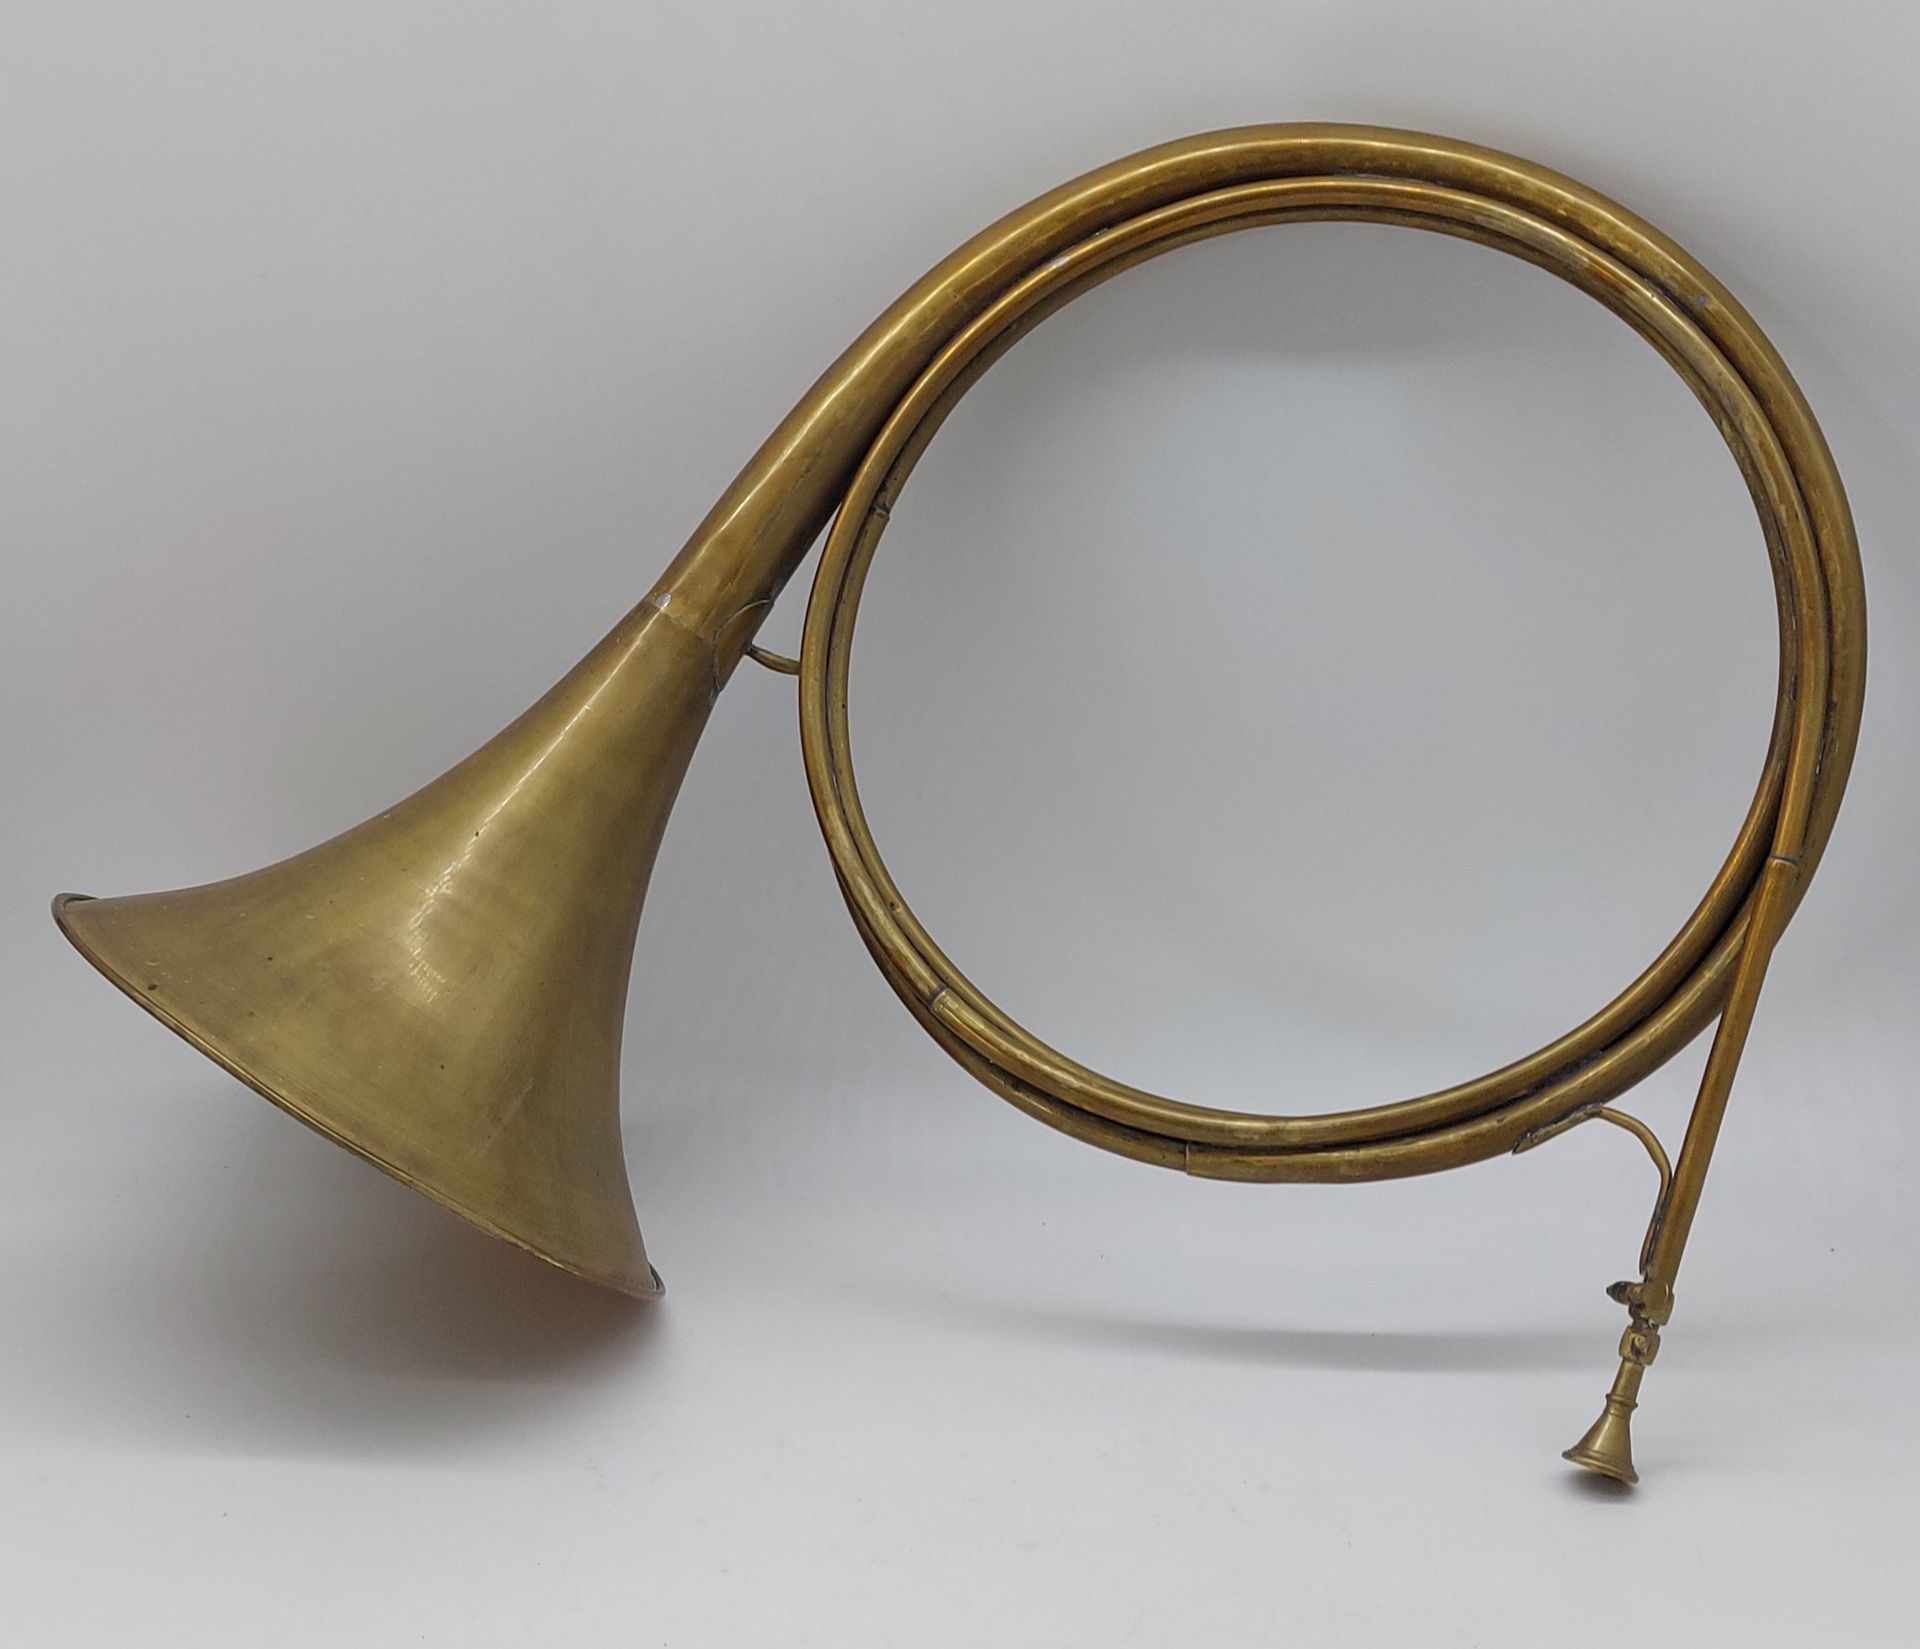 Null HUNTING HORN

XXth century